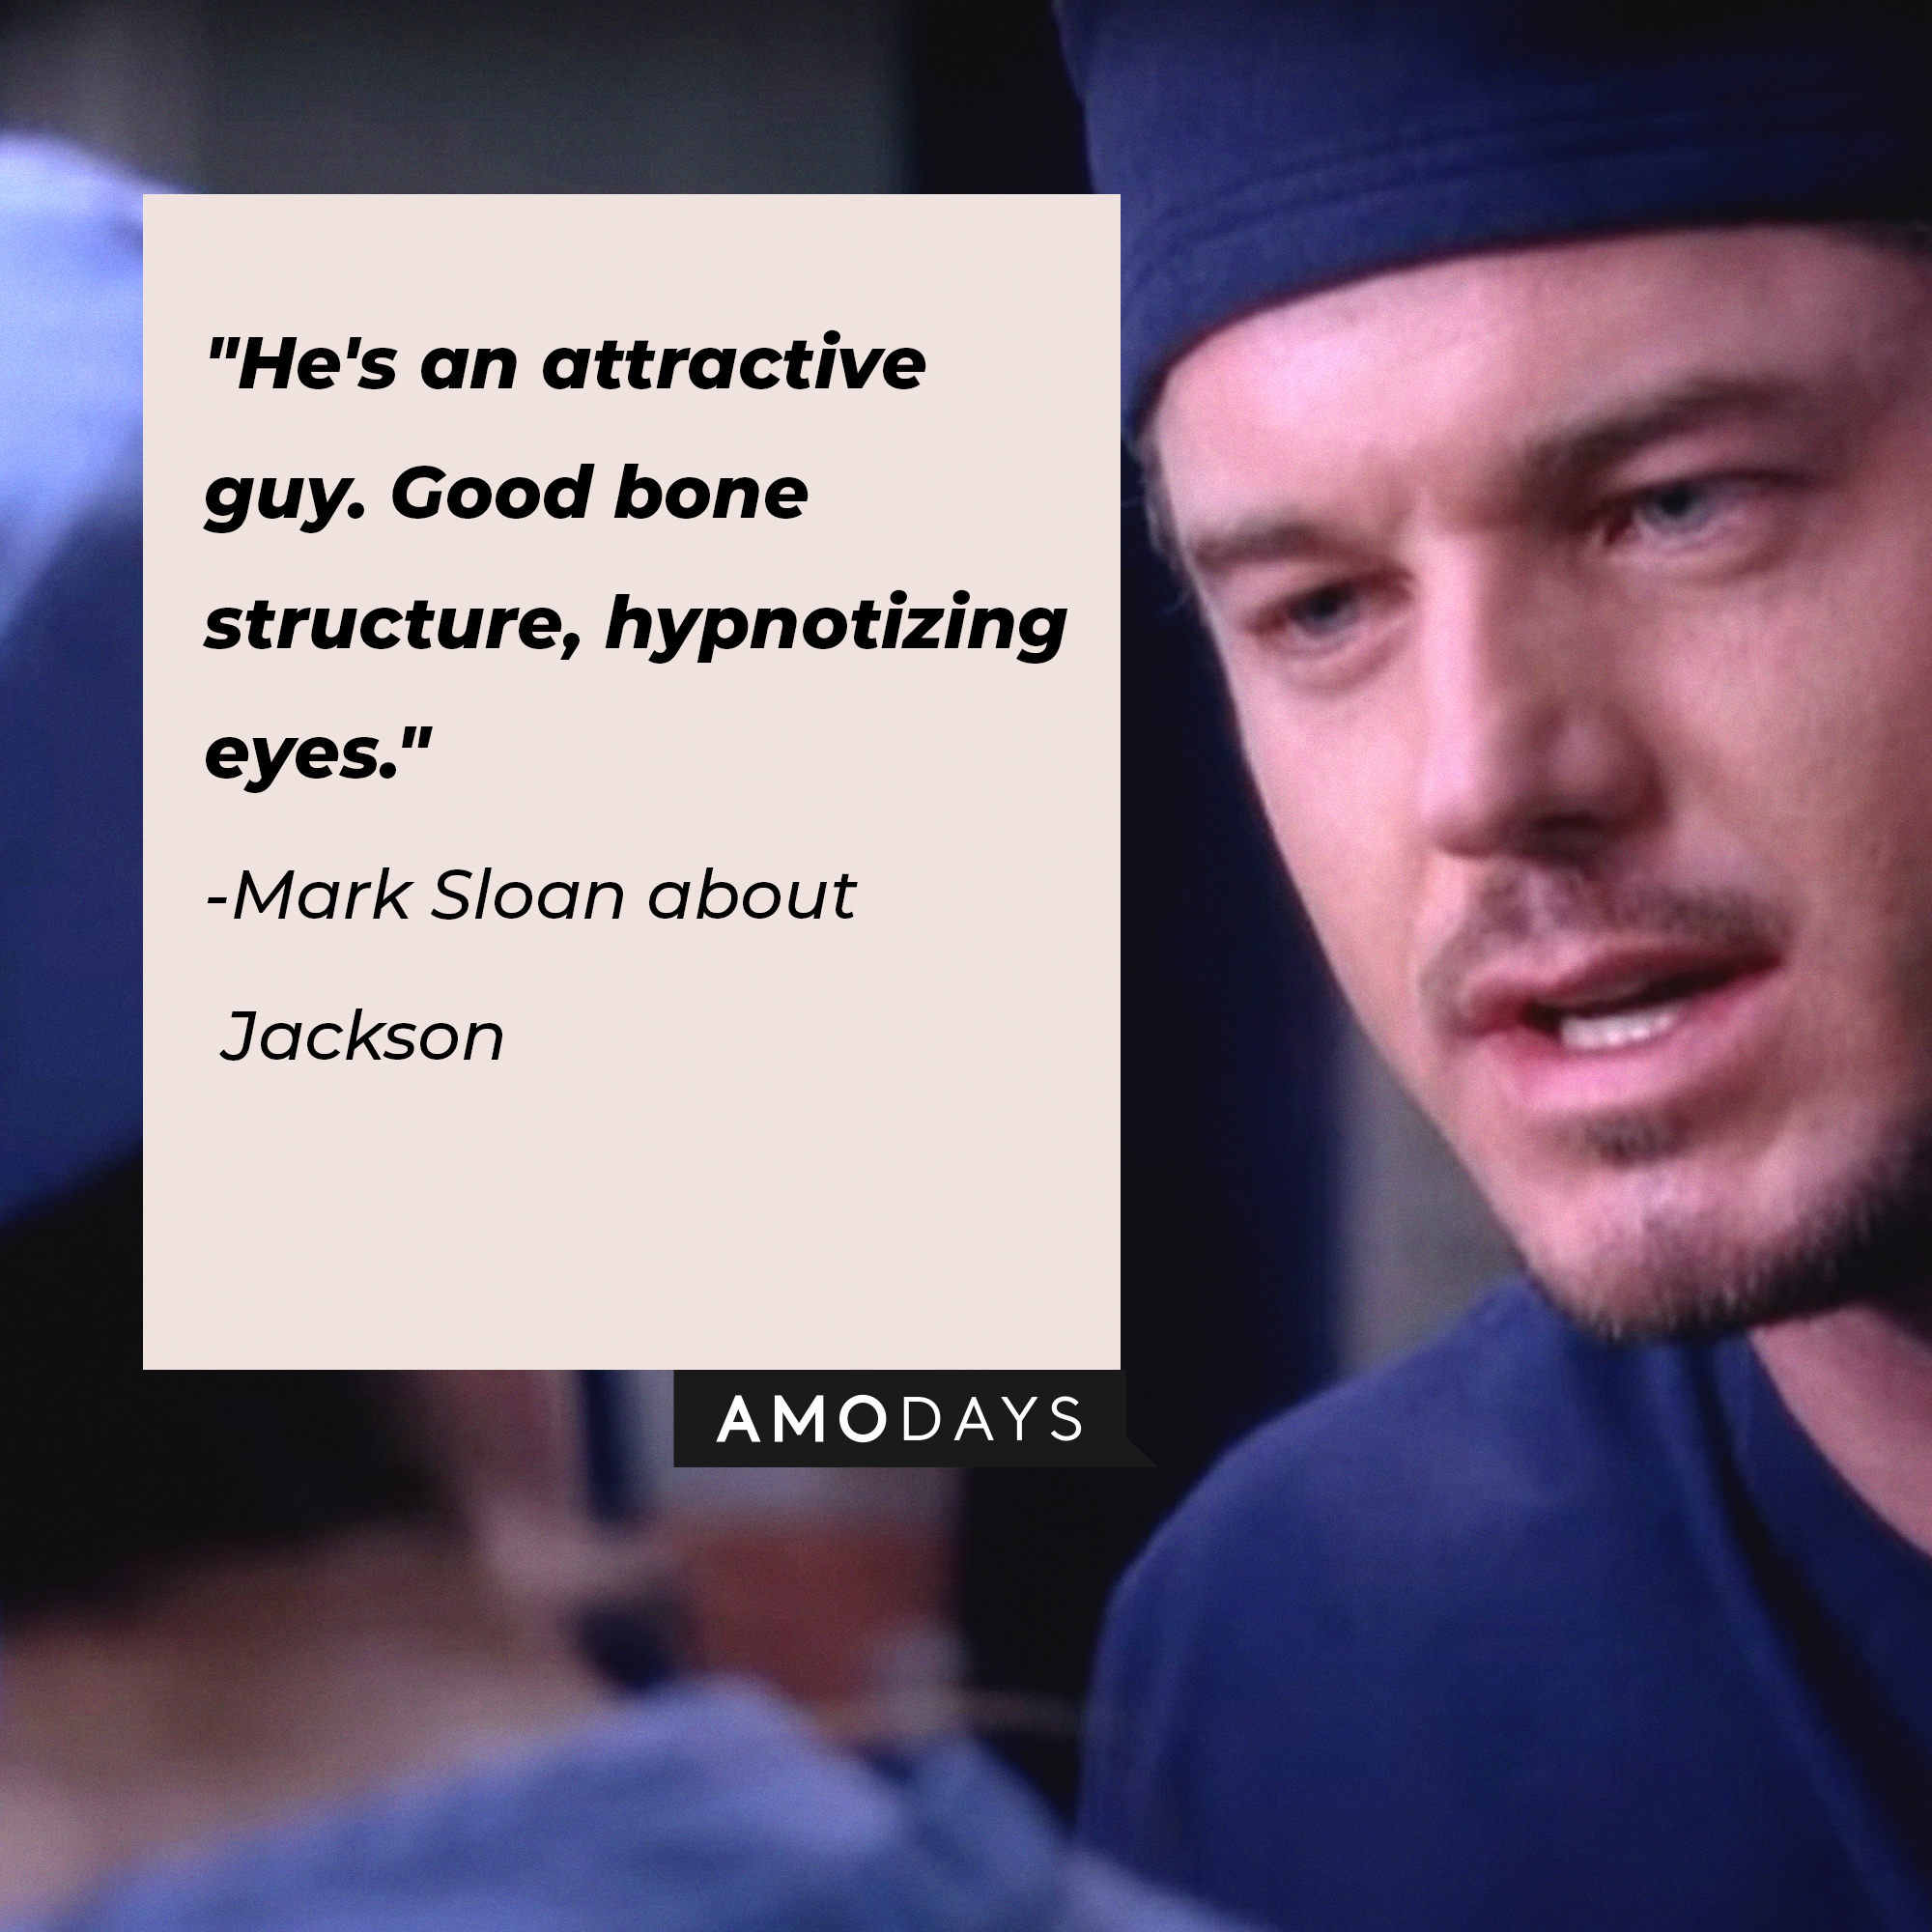 Mark Sloan's quote about Jackson: "He's an attractive guy. Good bone structure, hypnotizing eyes." | Image: AmoDays